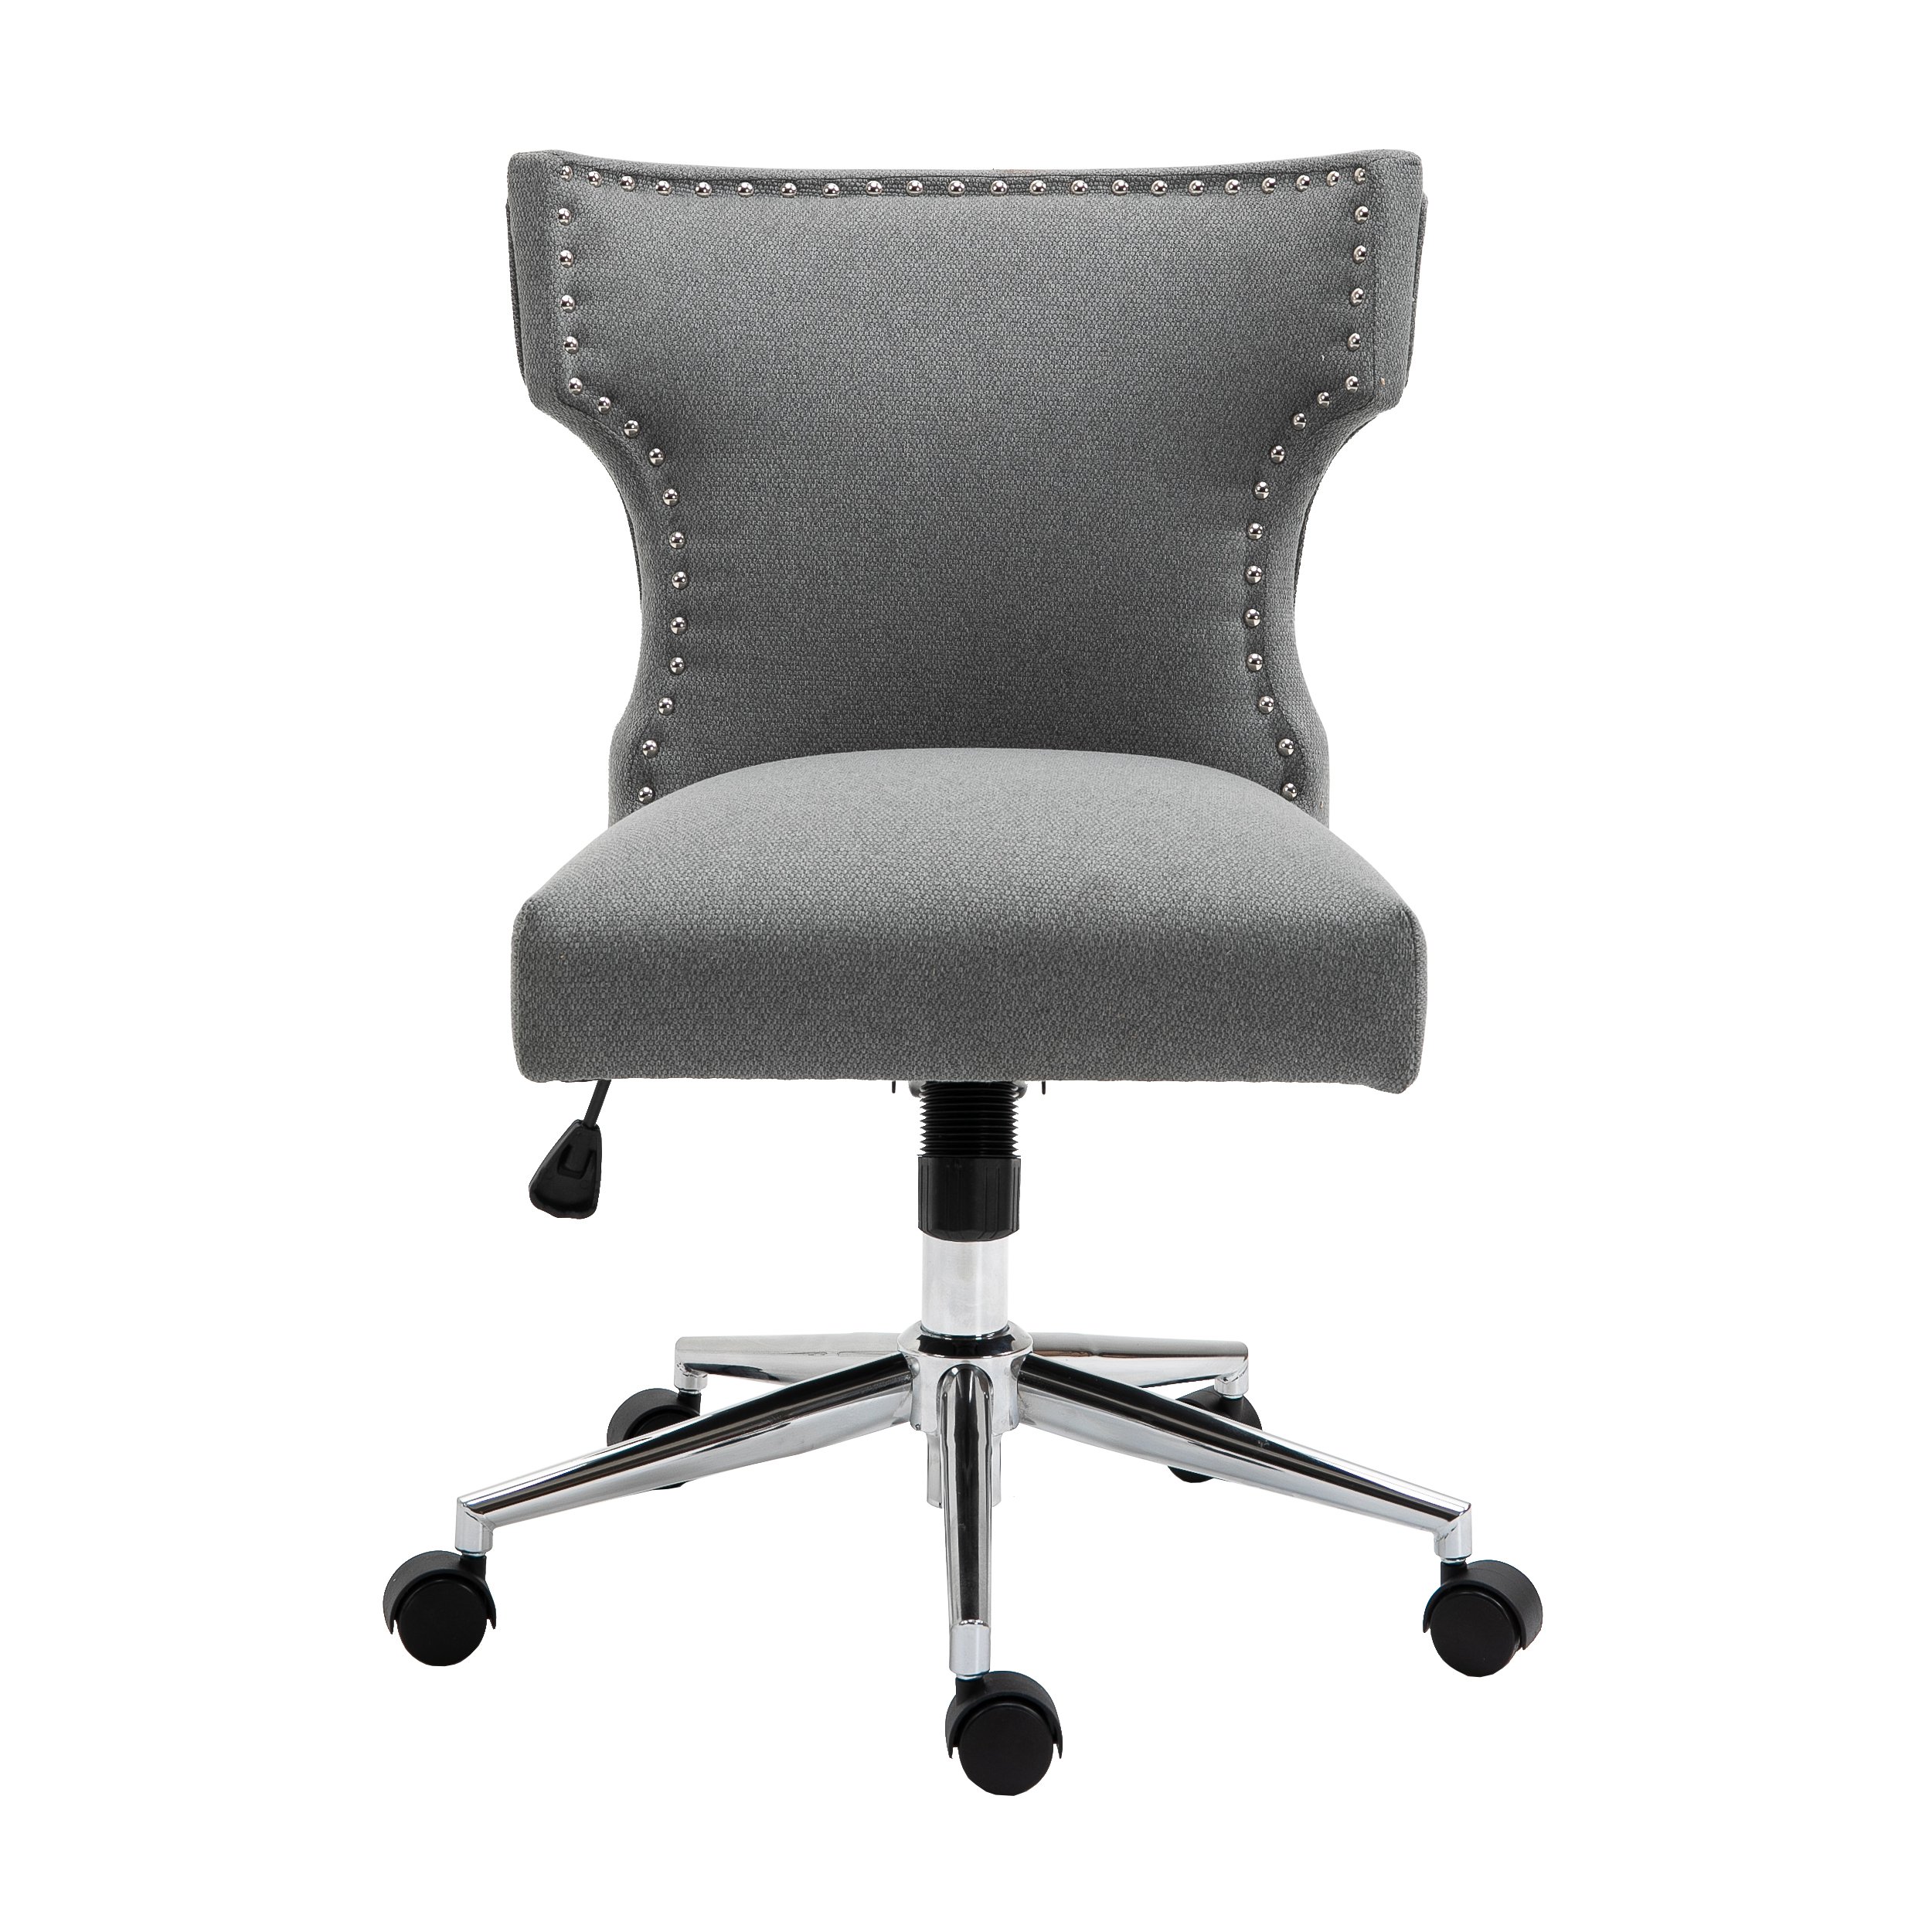 High quality fabric upholstered Office Chair-CASAINC